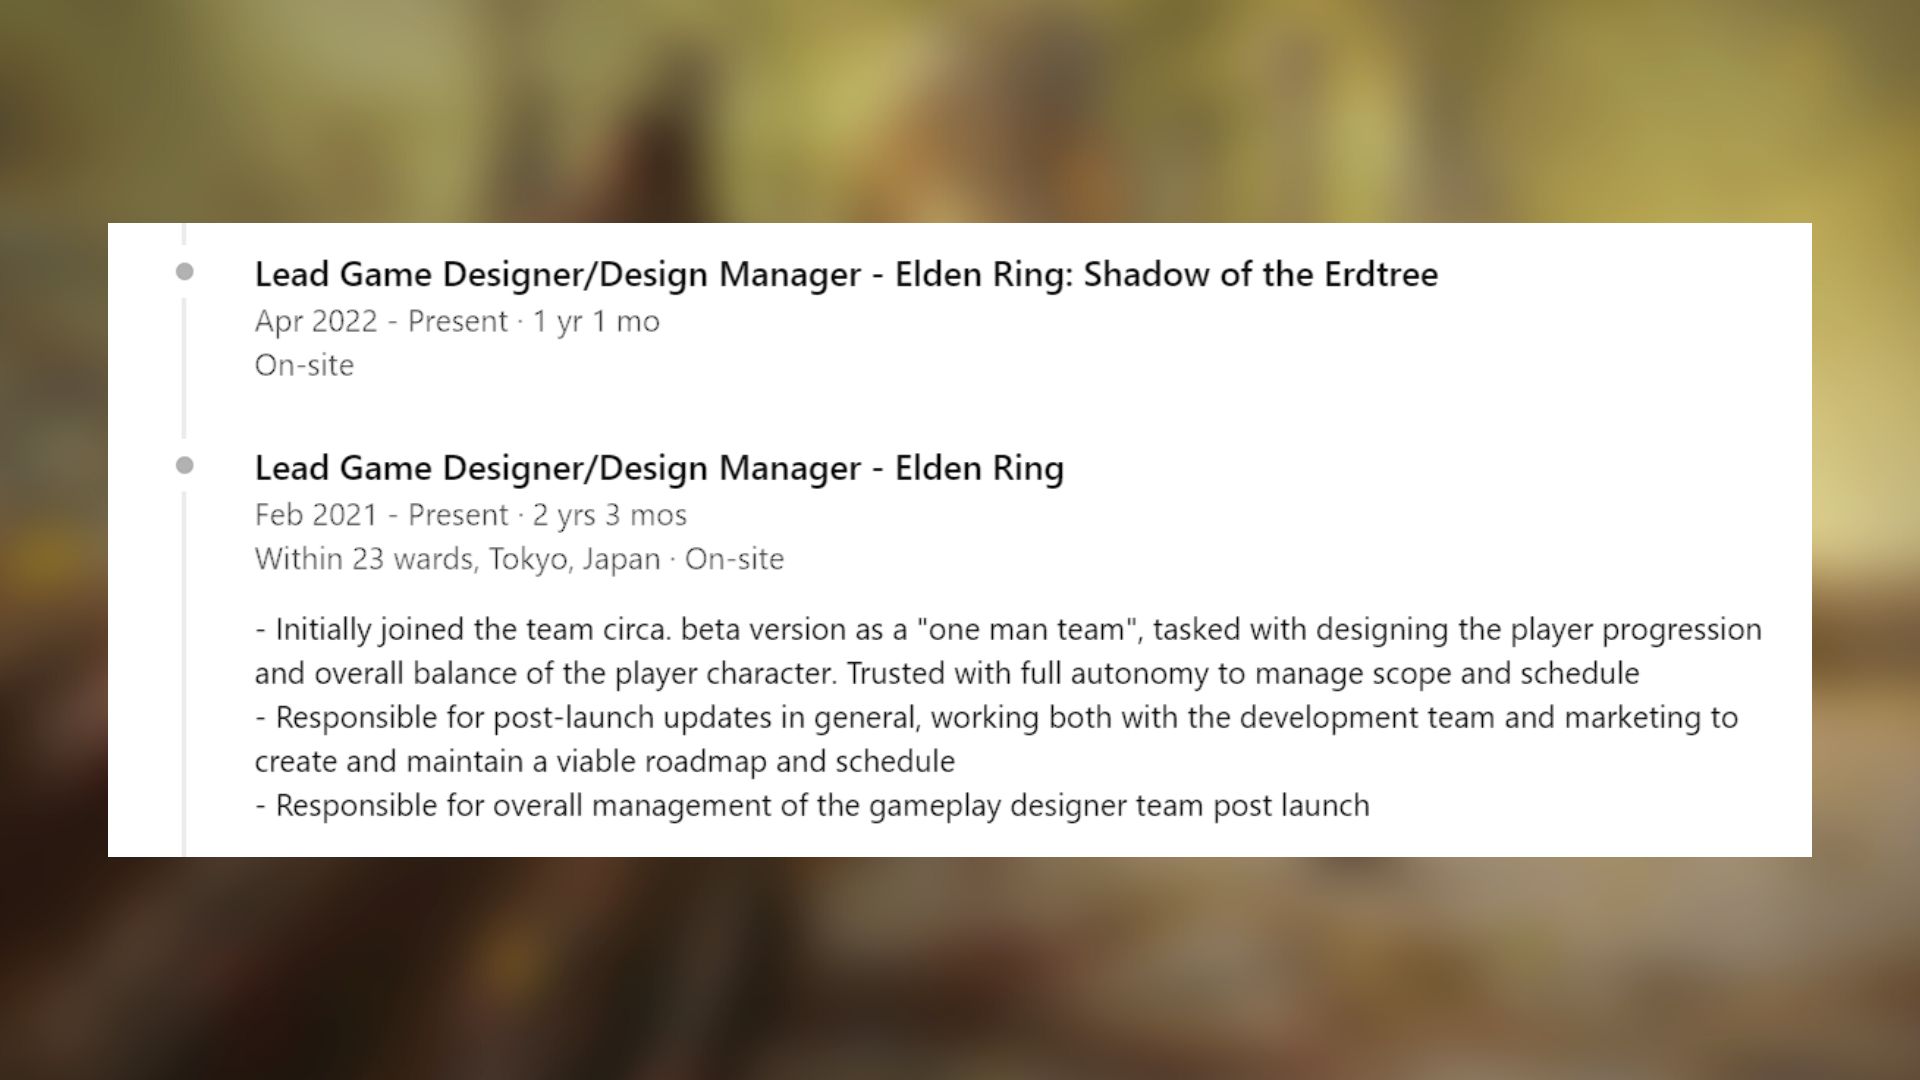 Elden Ring DLC development is 'proceeding smoothly', says From